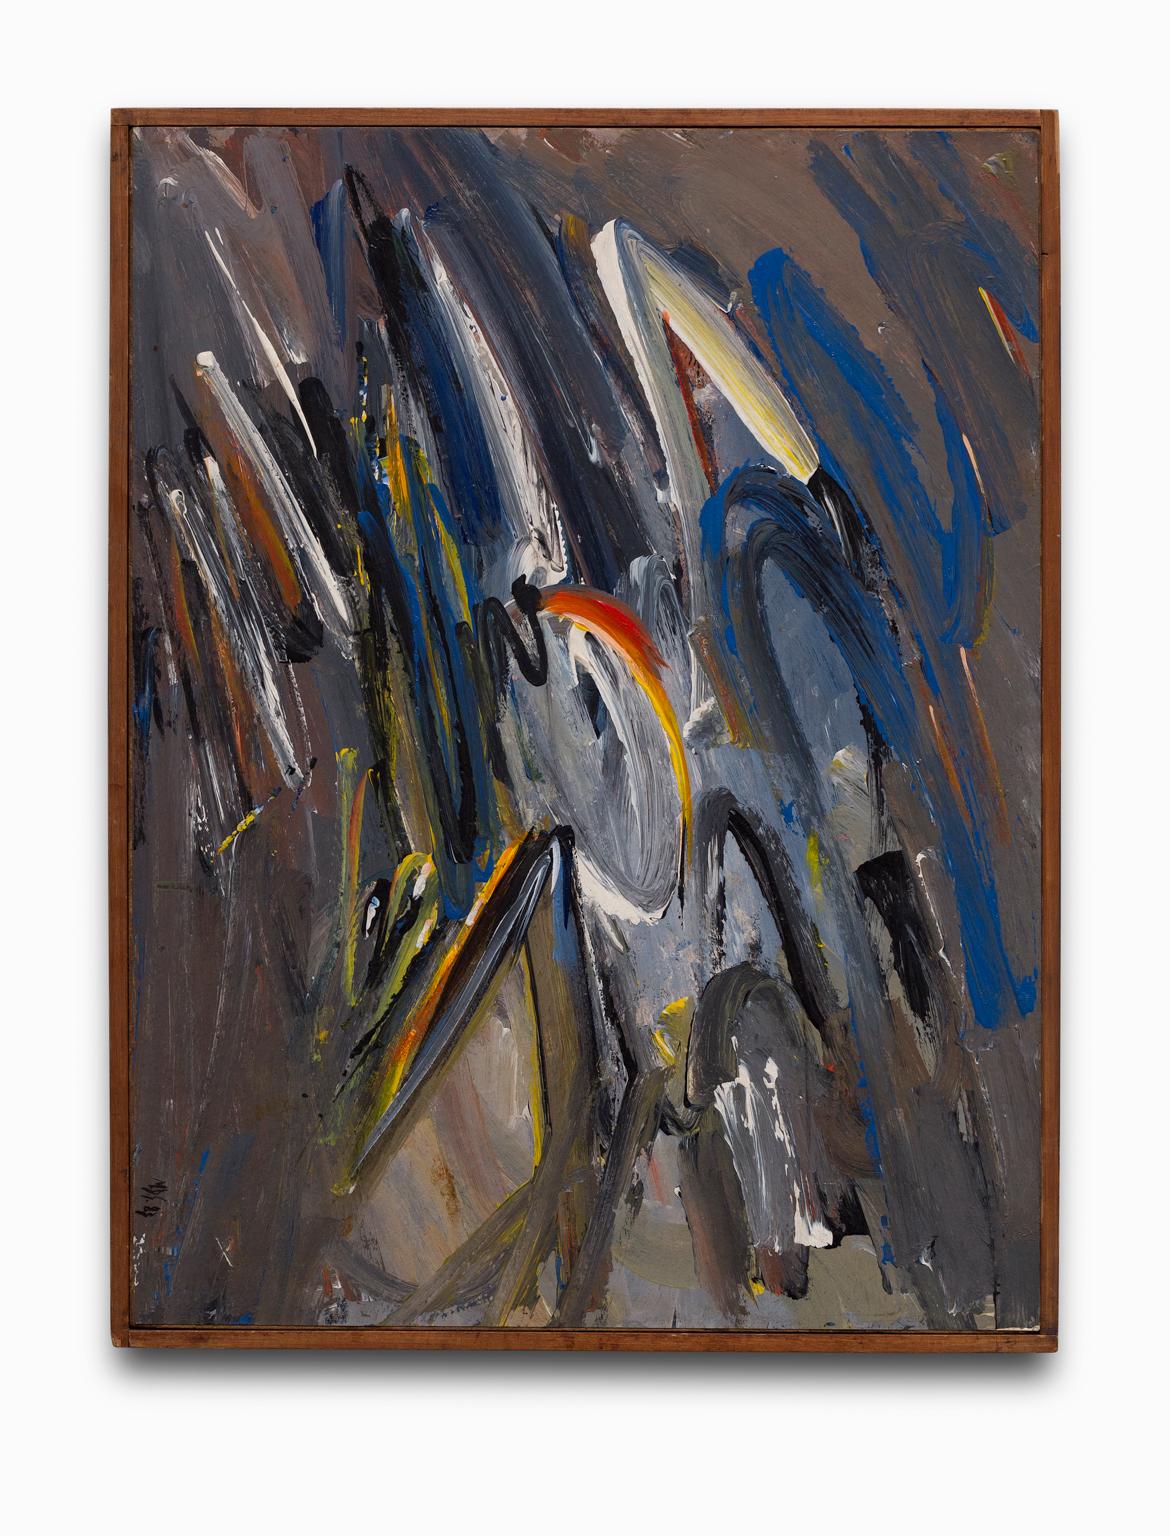 Merton Simpson Abstract Painting - "Untitled Abstract" Oil on Board, Abstract Expressionist, Signed by the Artist